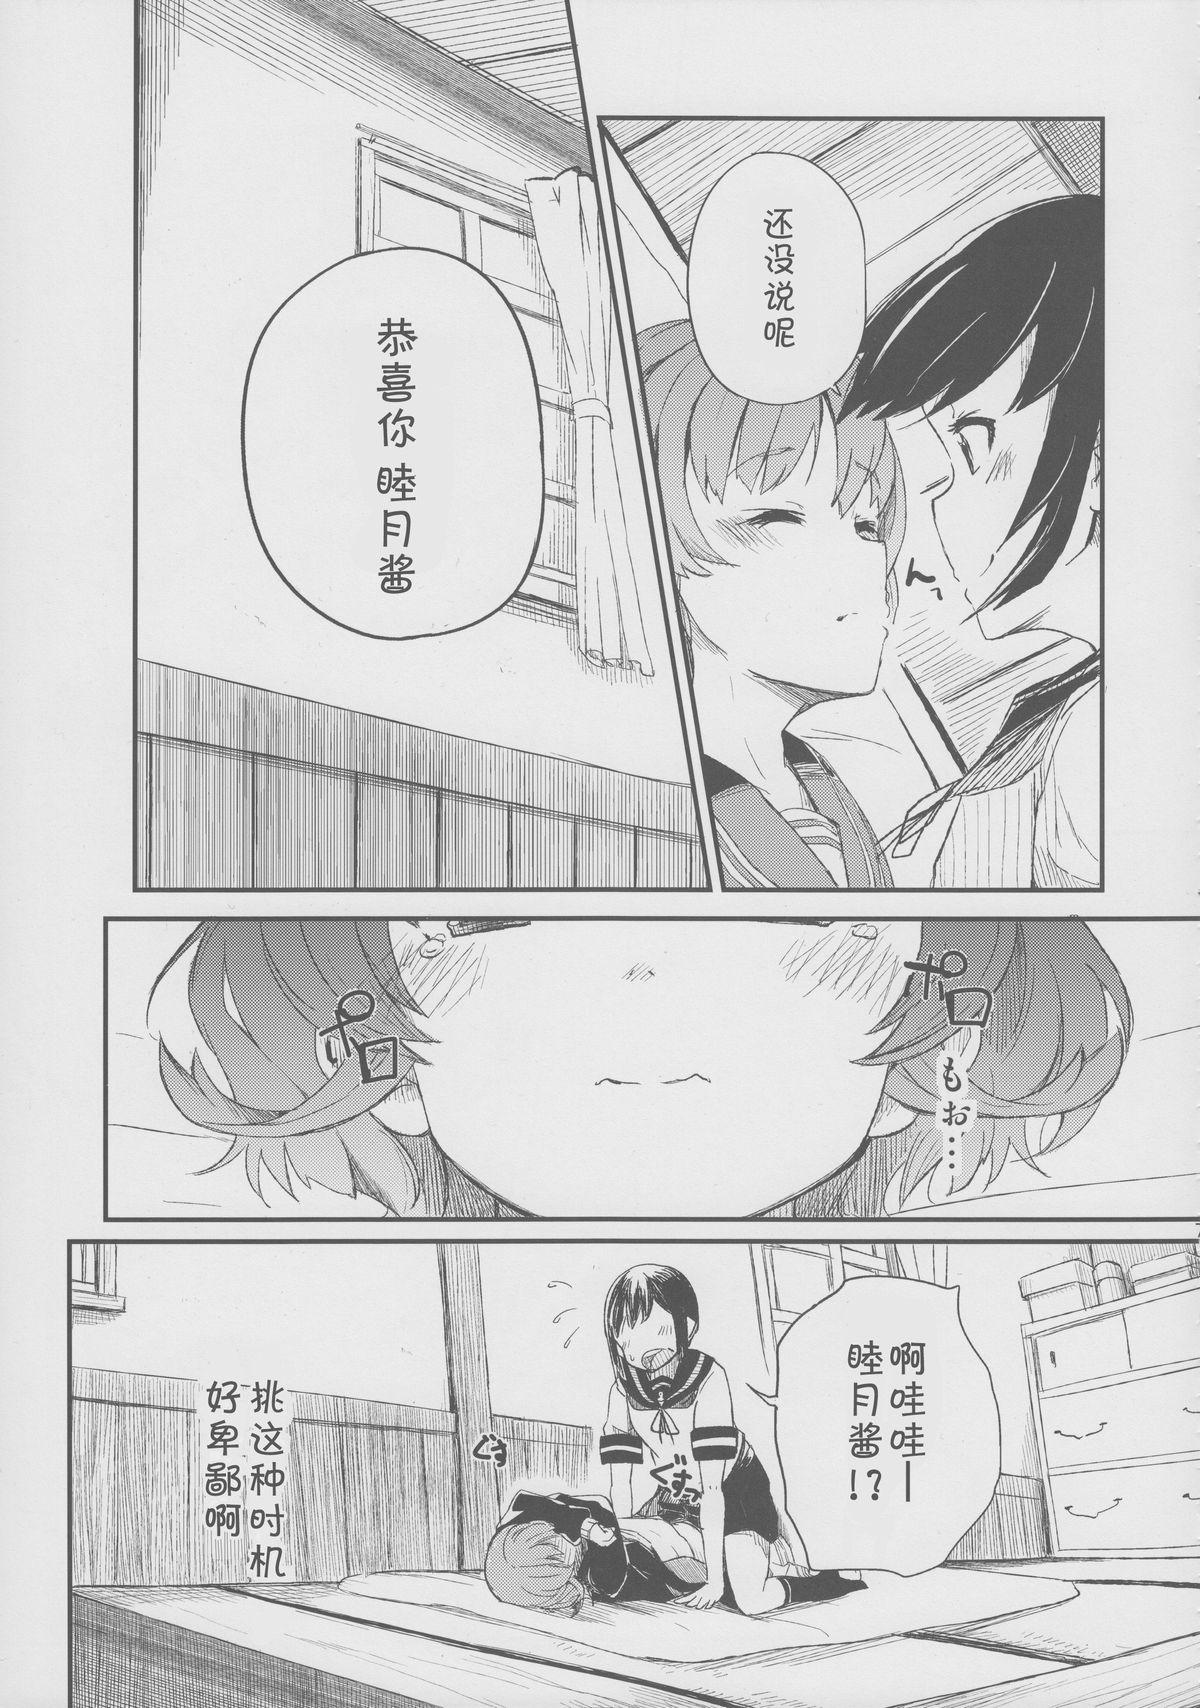 Letsdoeit late flowering - Kantai collection French - Page 9